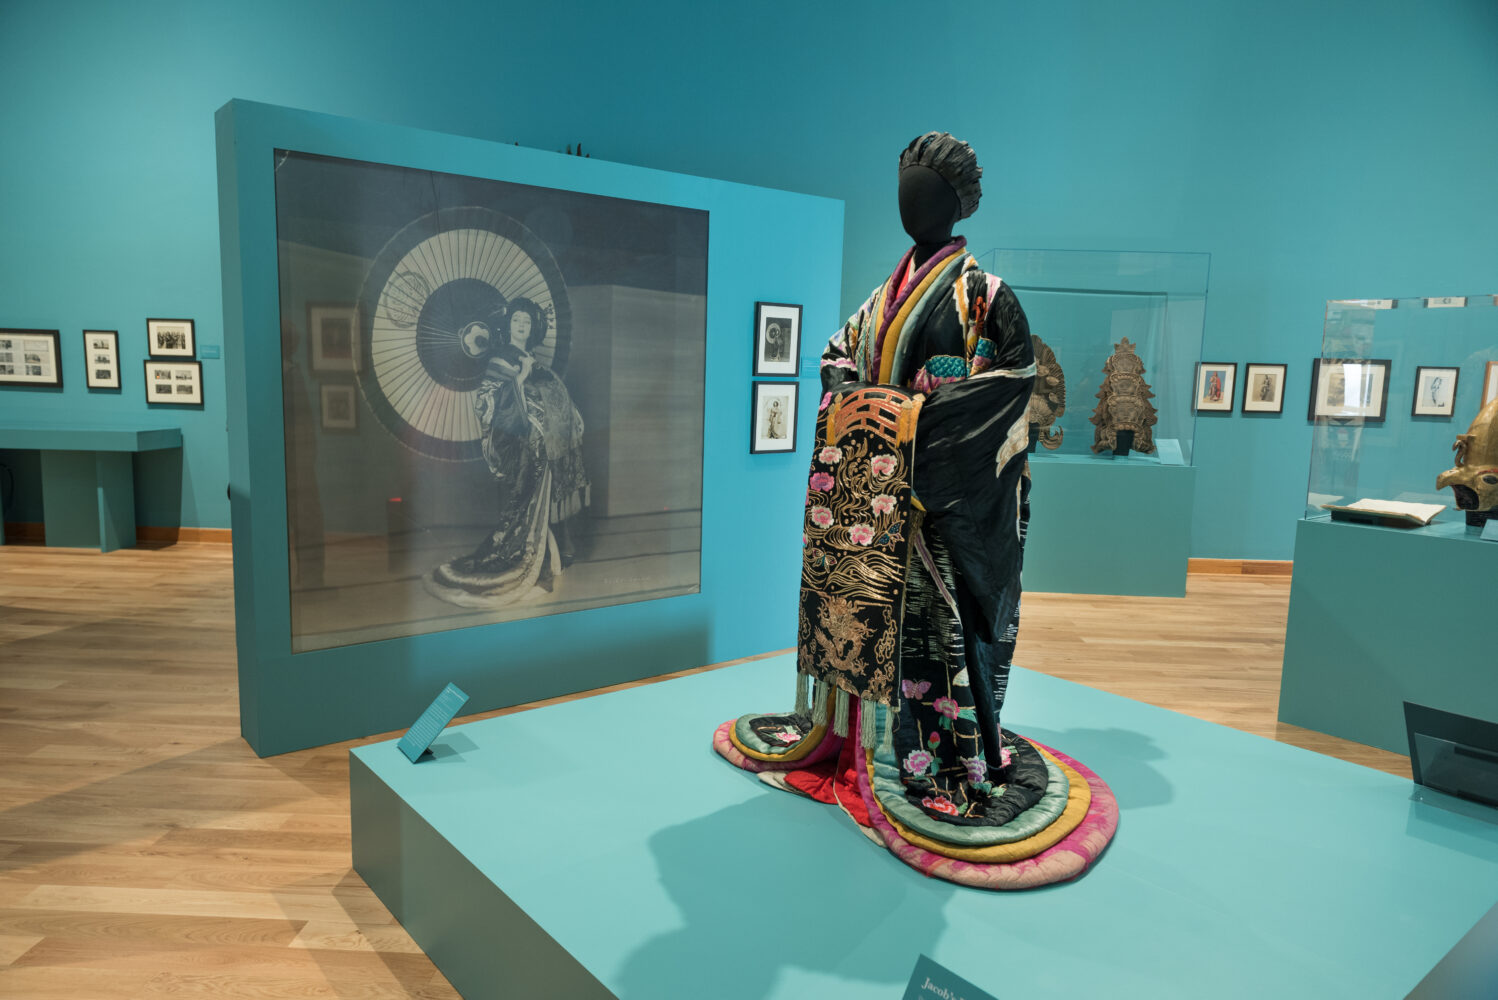 A Japanese kimono is displayed on a statue in an art gallery with blue walls.